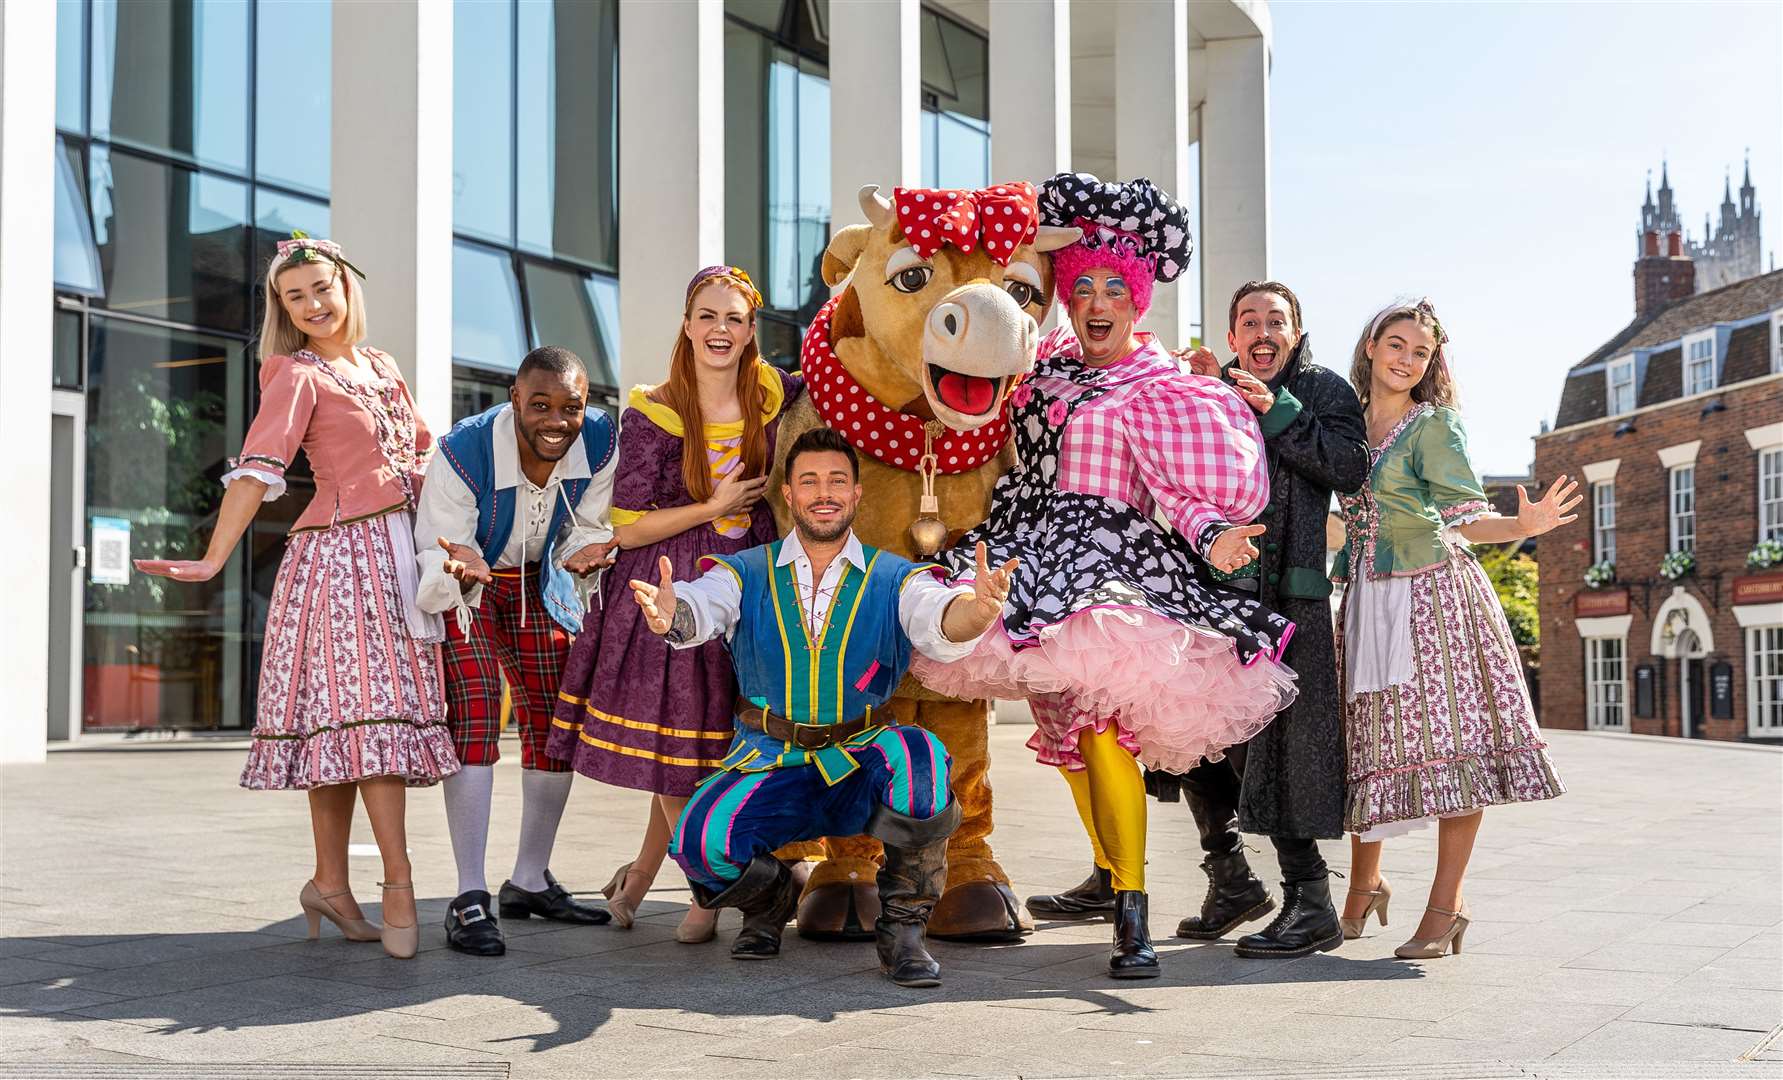 The cast of Jack and the Beanstalk at the Marlowe Theatre